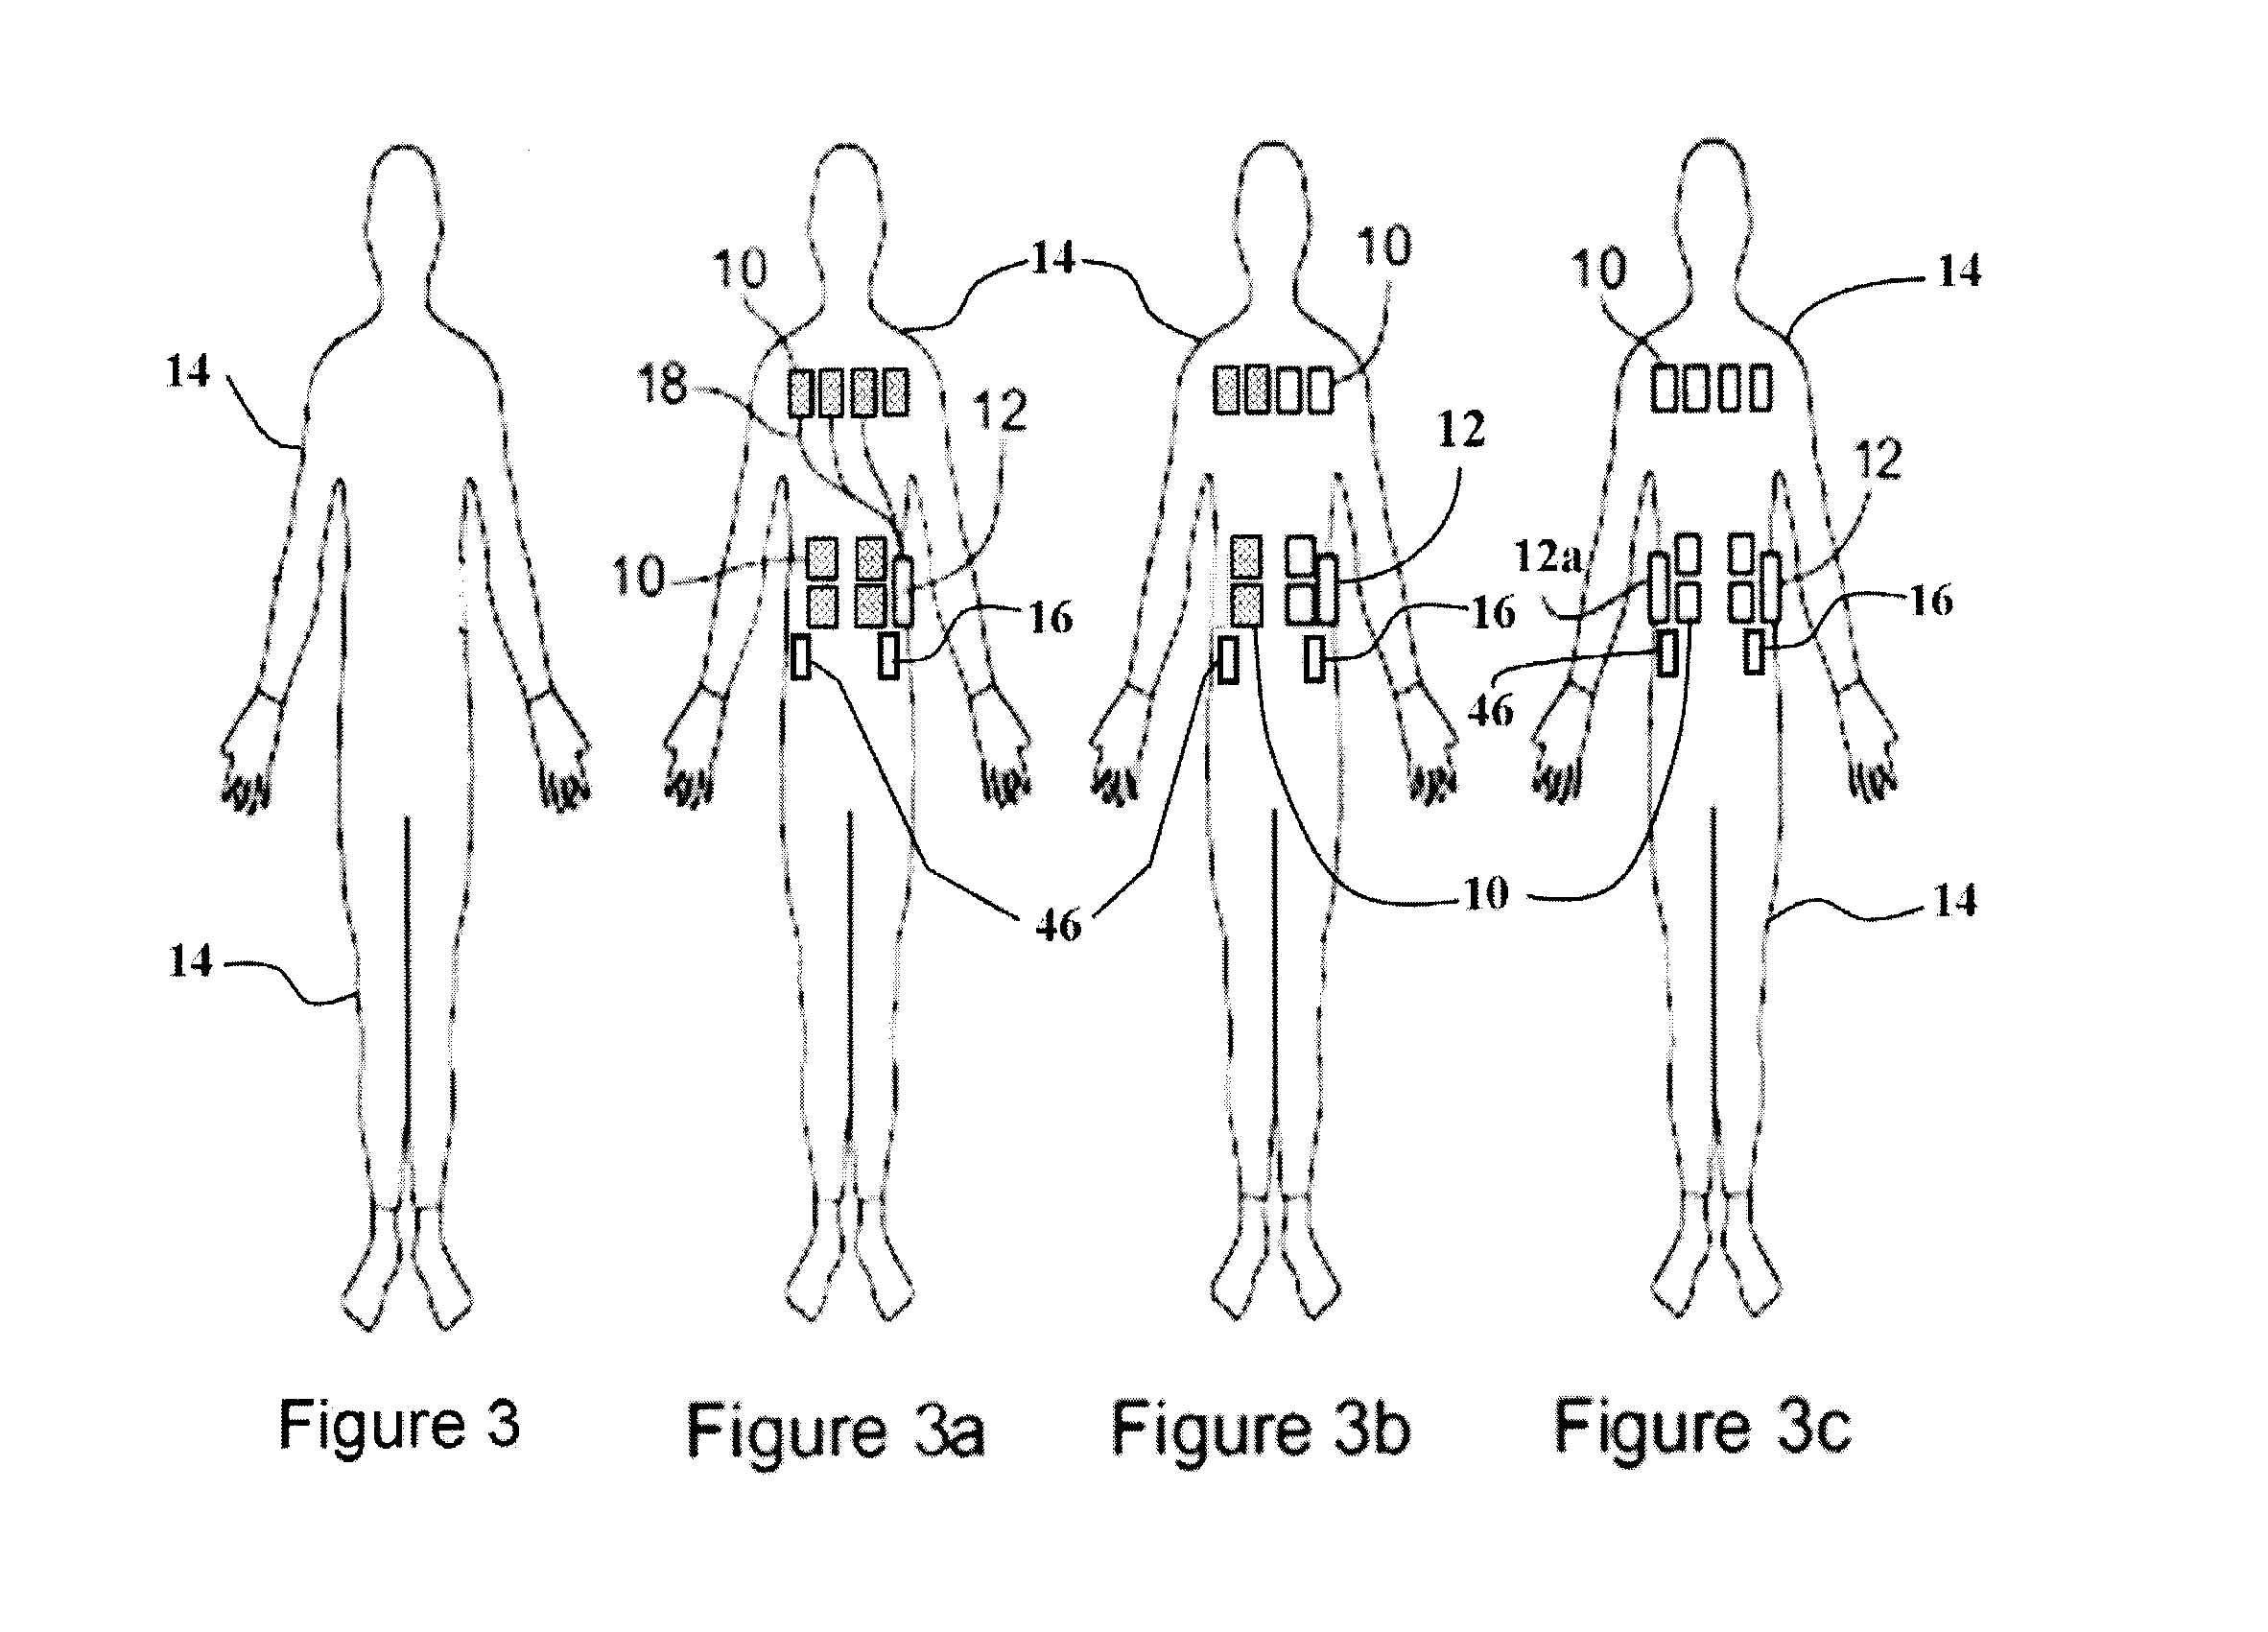 Wearable devices, systems, methods and architectures for sensory stimulation and manipulation and physiological data acquisition